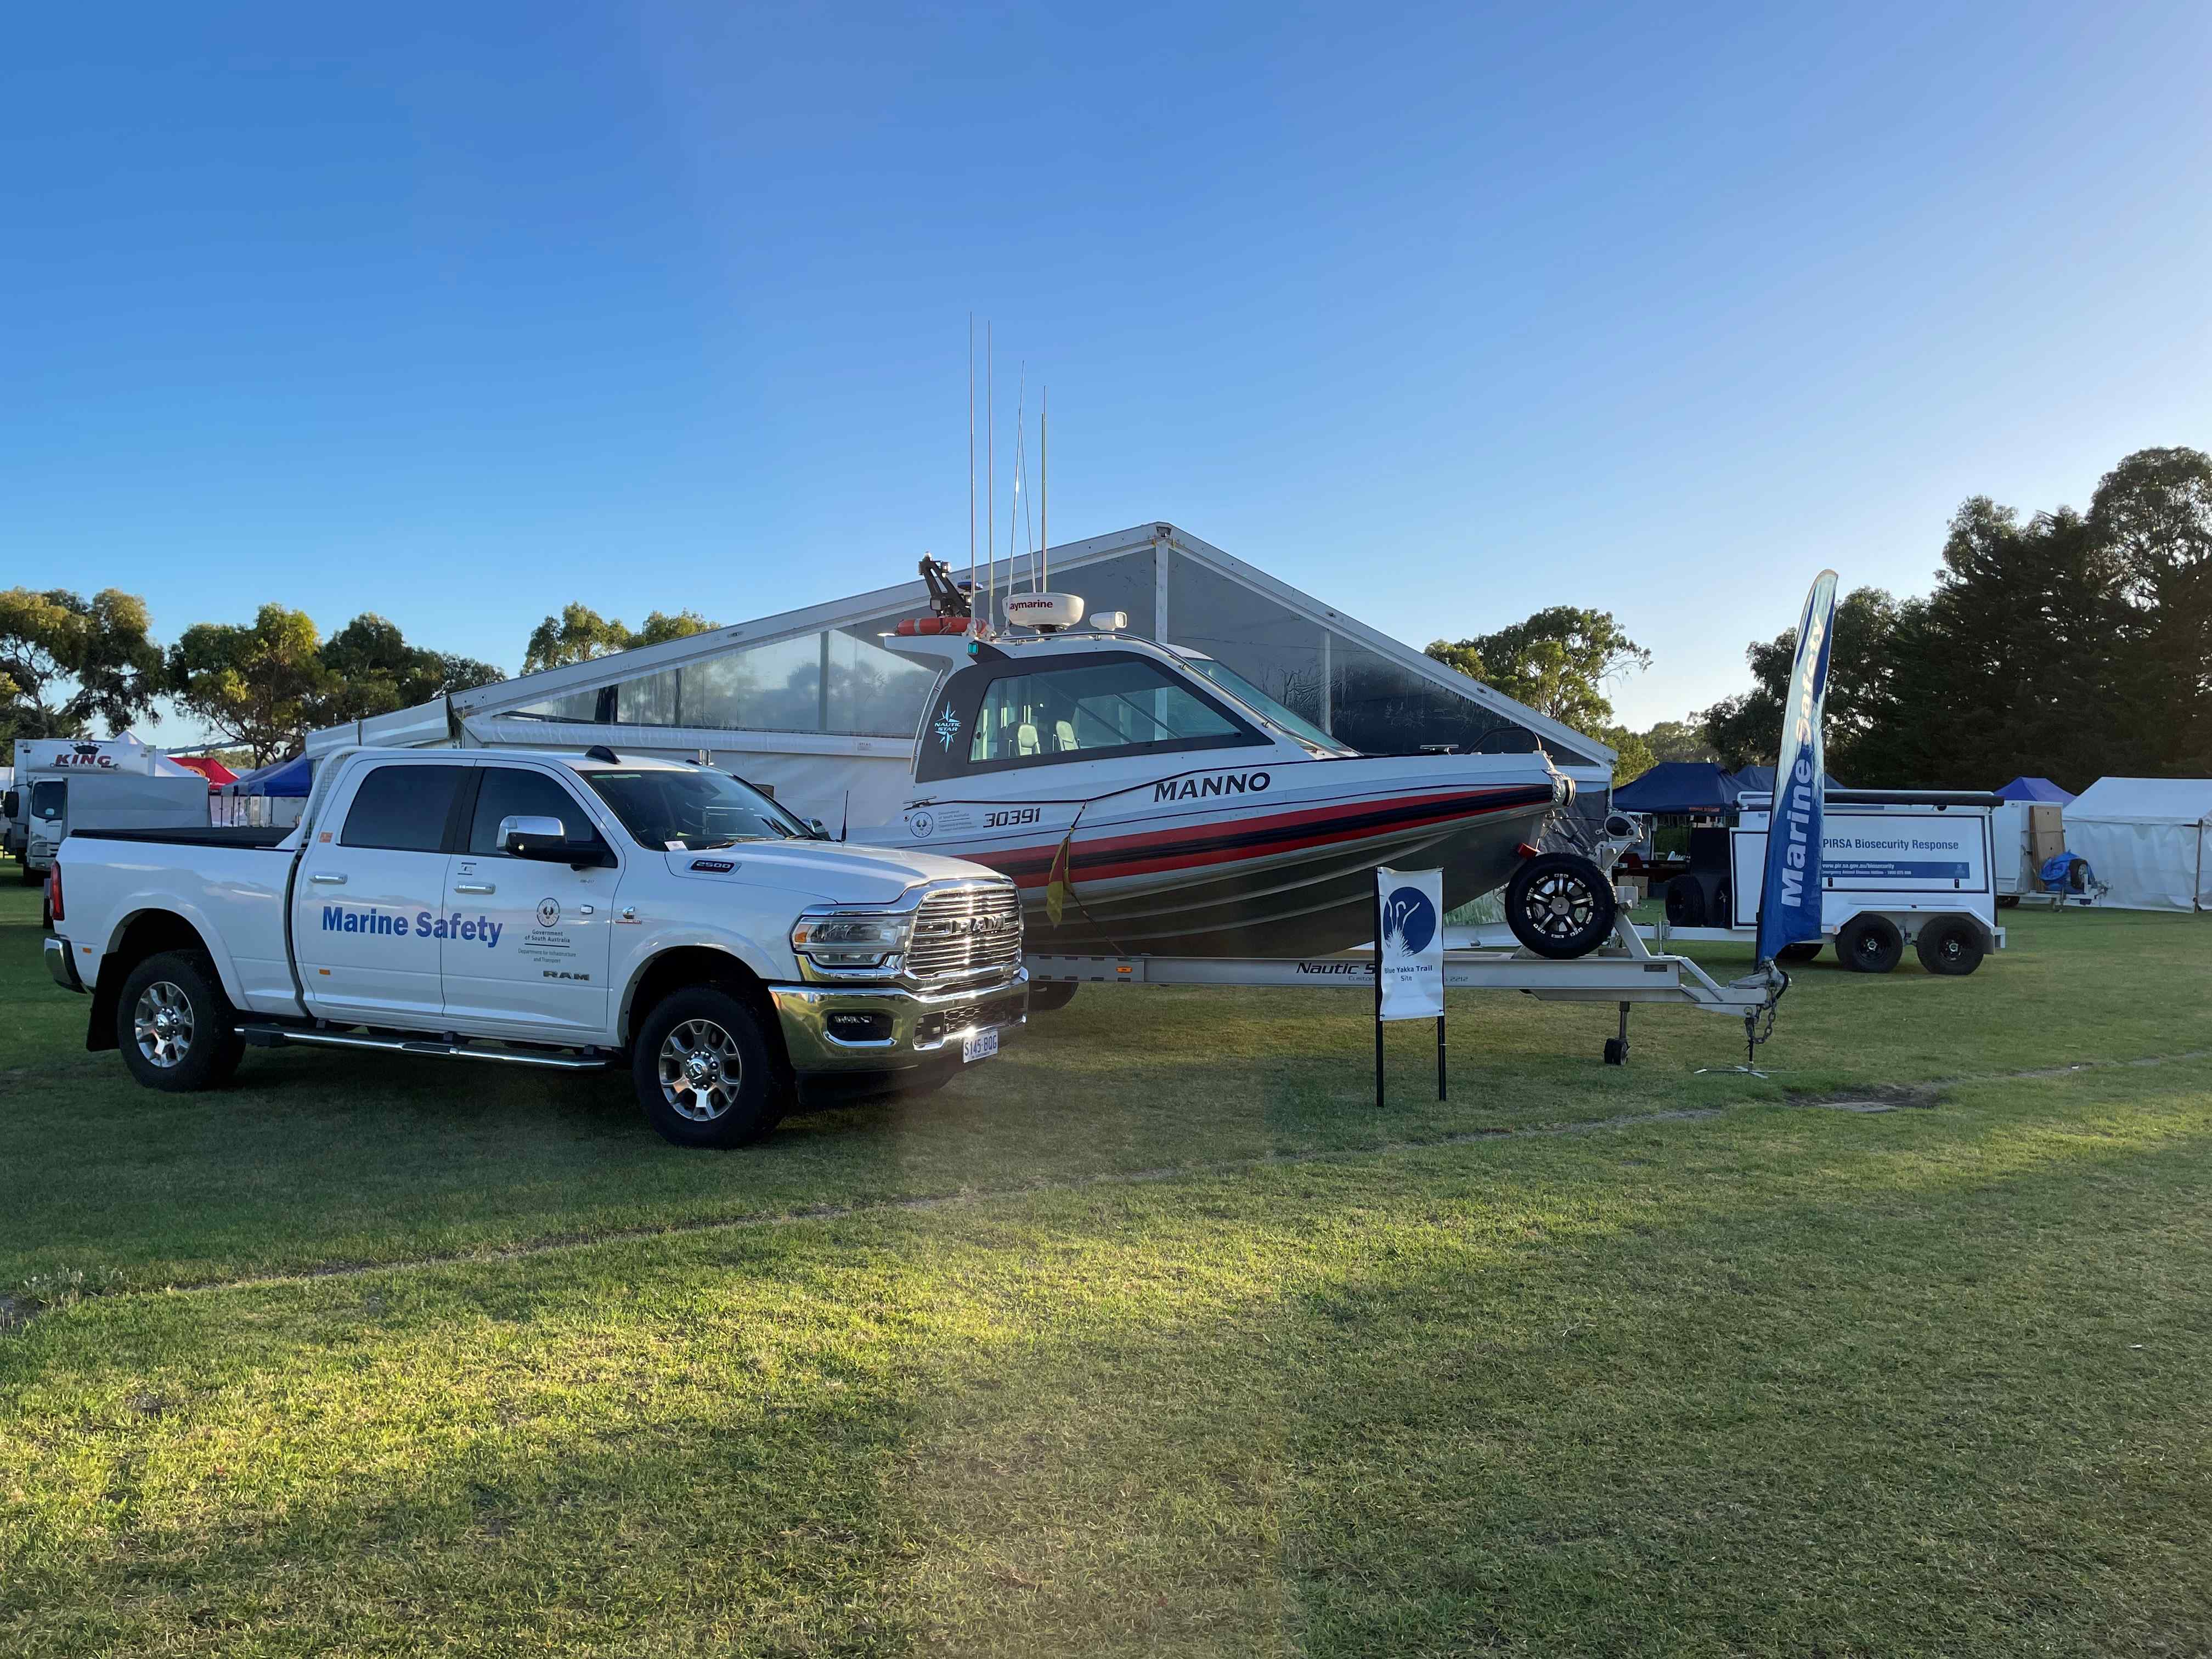 Marine Safety SA car and boat at the Lucindale field days event